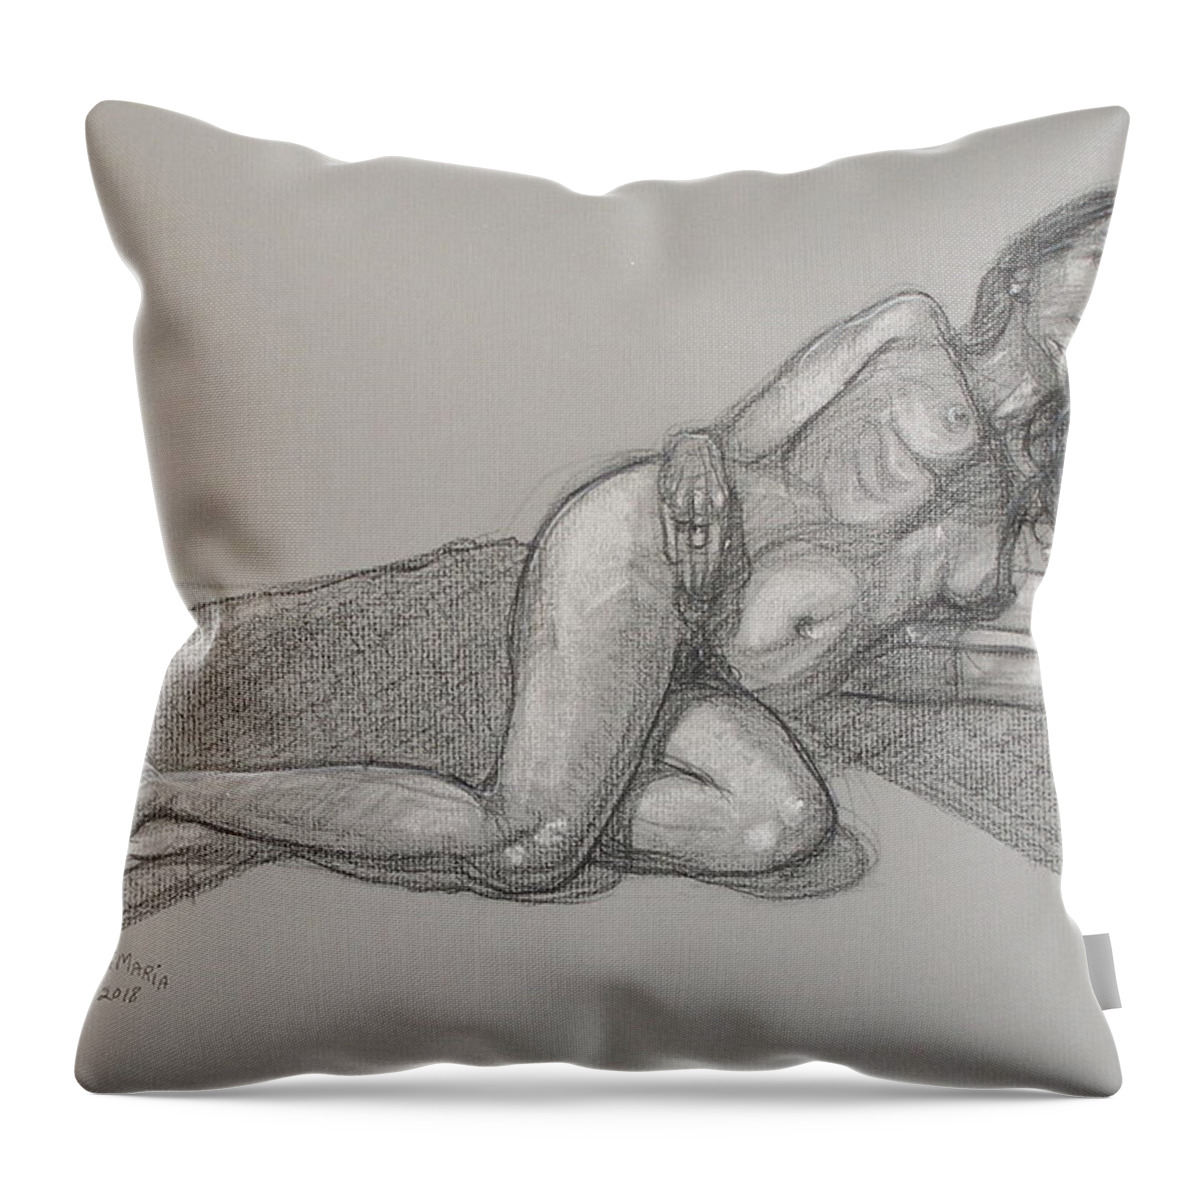 Realism Throw Pillow featuring the drawing Arzelie Reclining 1 by Donelli DiMaria